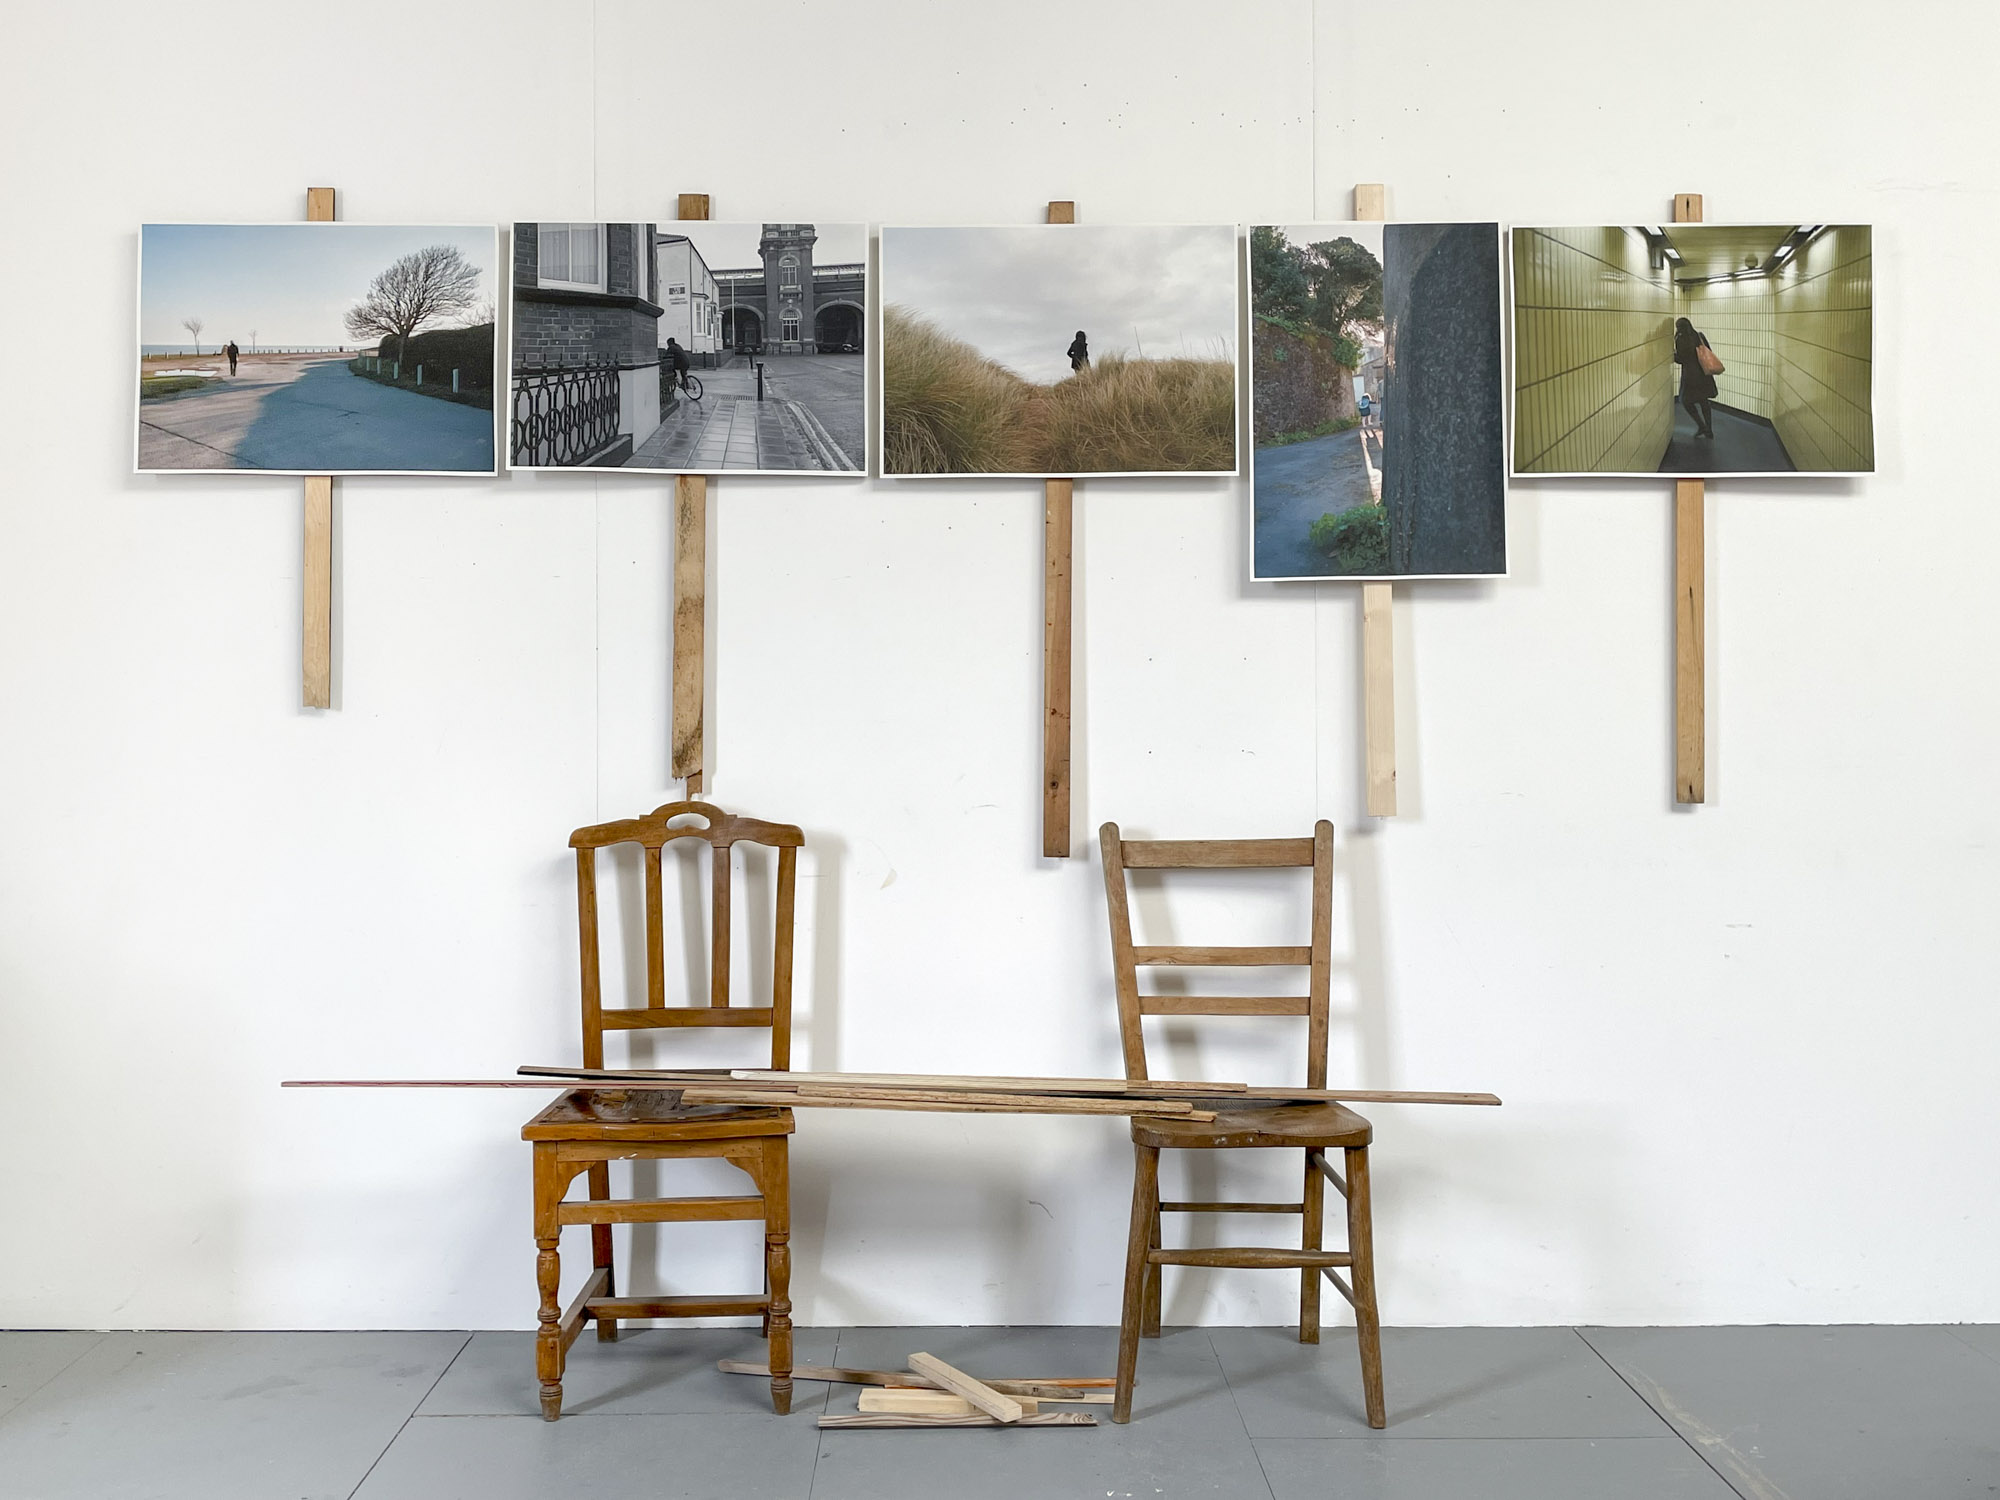 five images of people walking away from the viewer pinned to a wall on poles, two chairs below them have poles balanced between them and on the floor